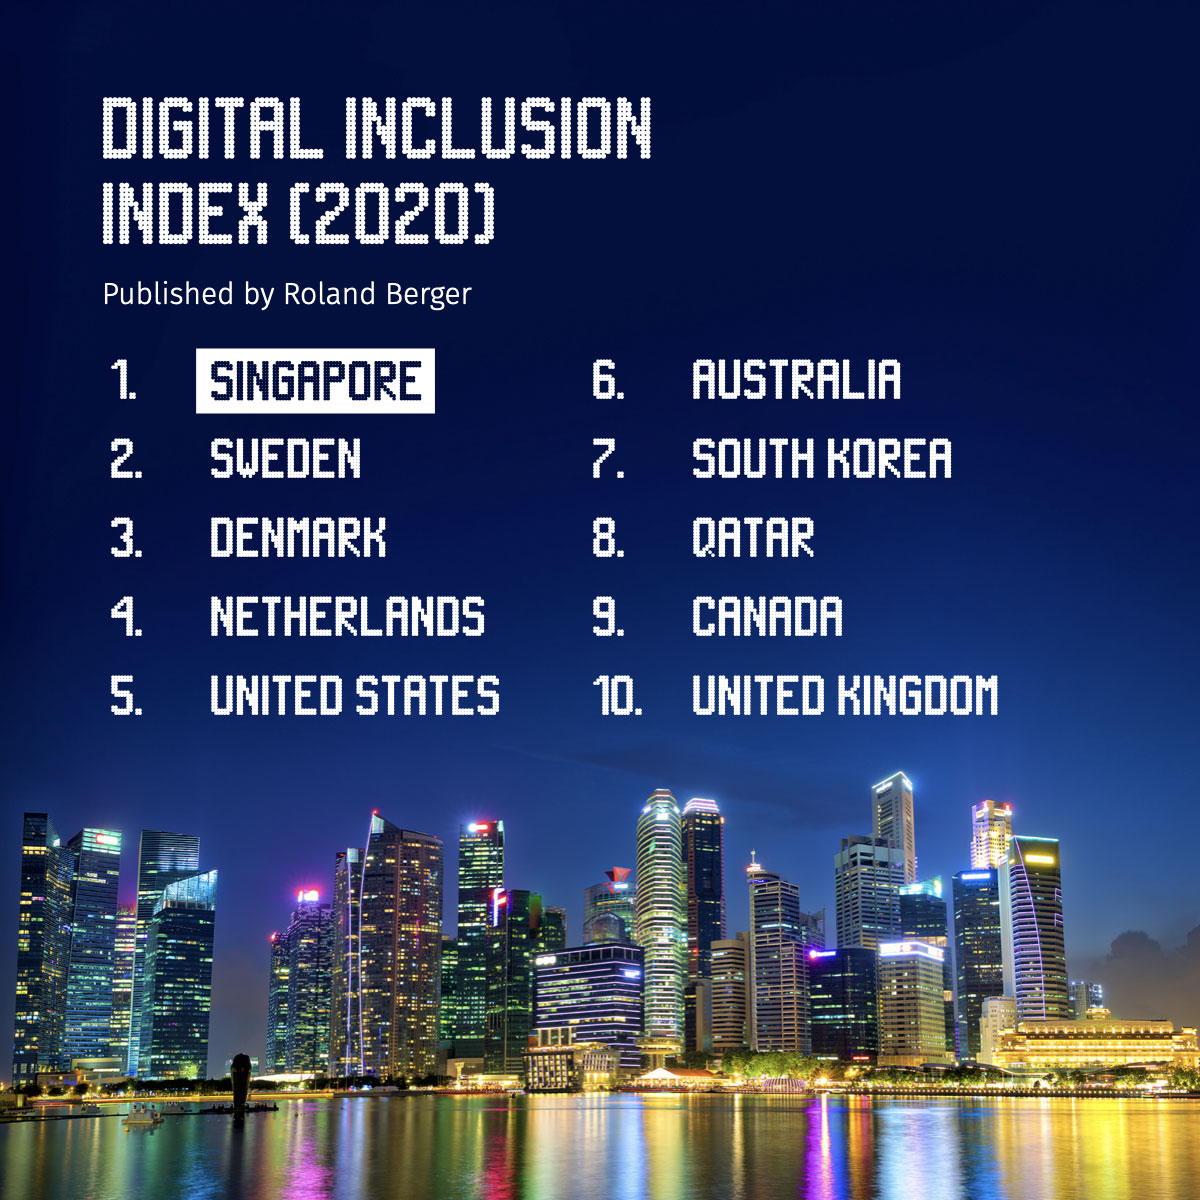 Roland Berger Digital Inclusion Index 2020 (Singapore is placed 1st in the ranking)